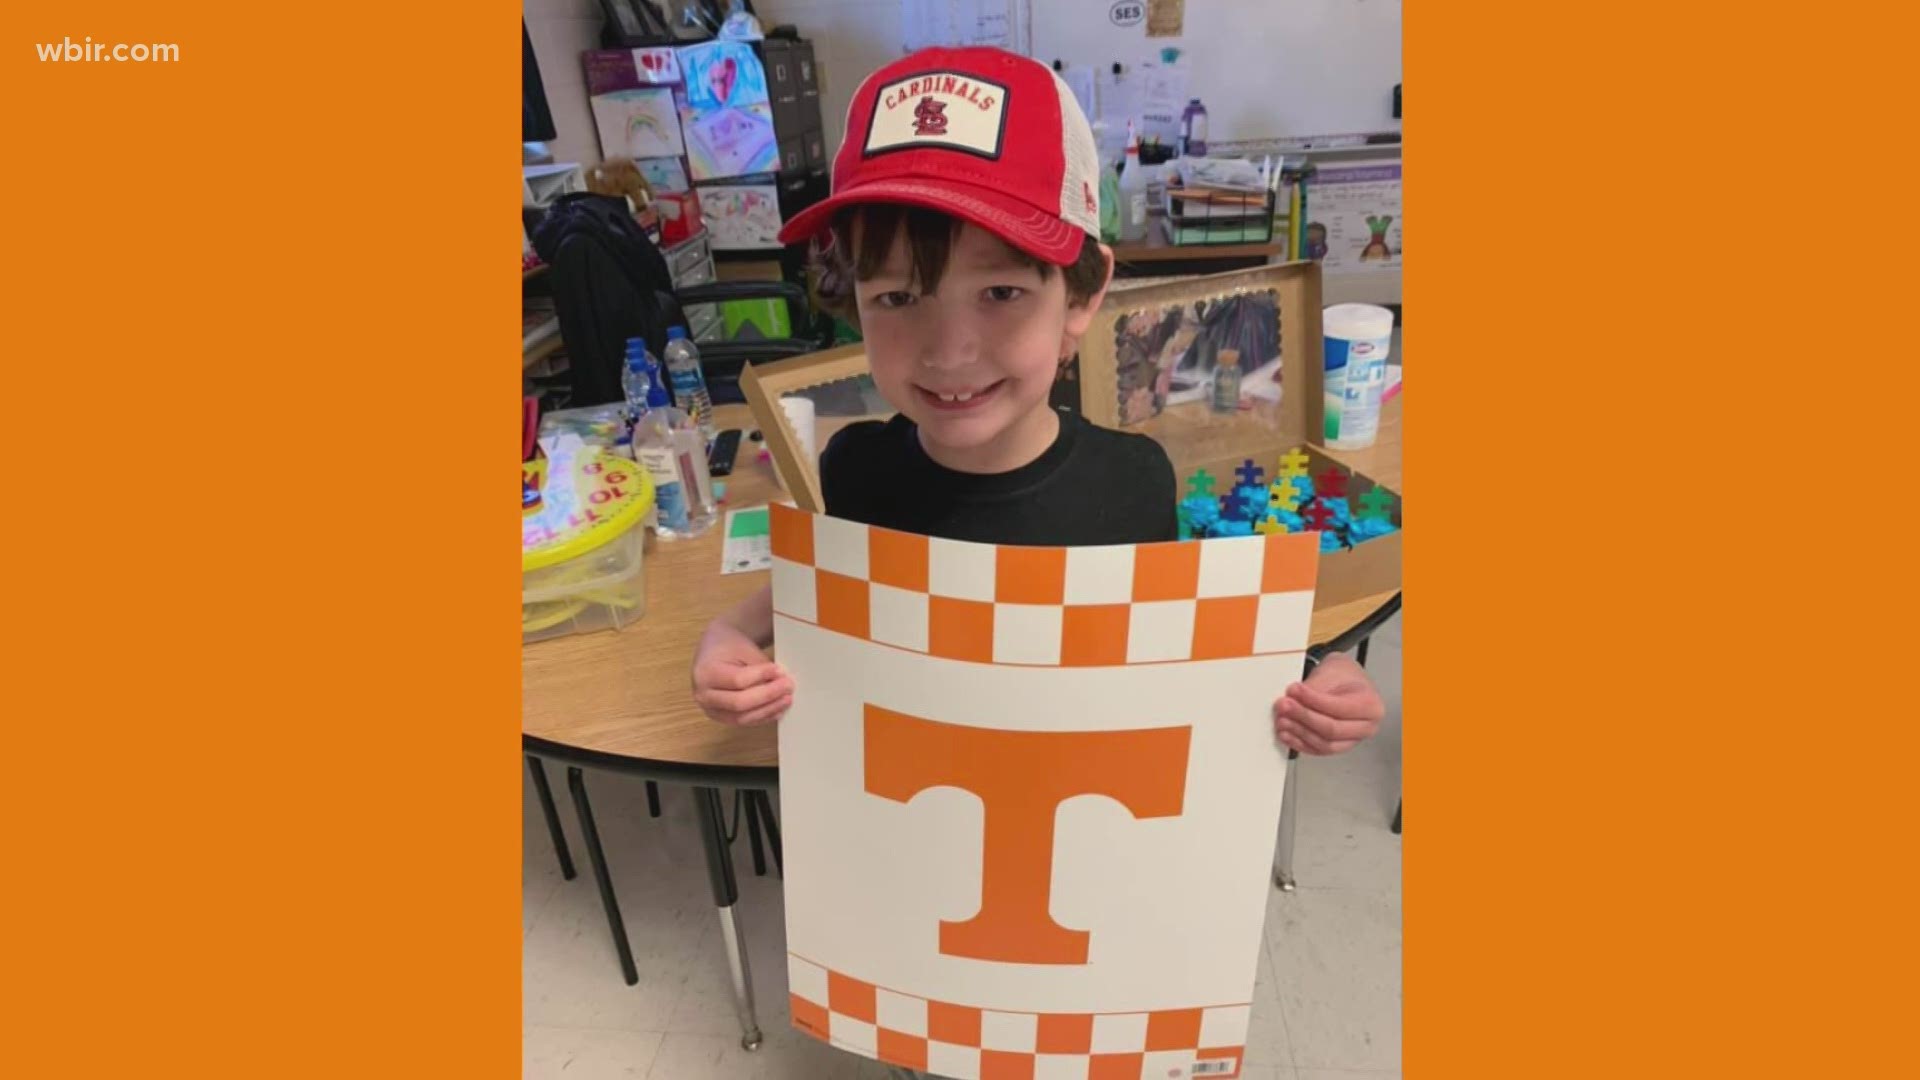 When an elementary school teacher in Georgia reached out to Vol Nation, many responded with gifts and support.